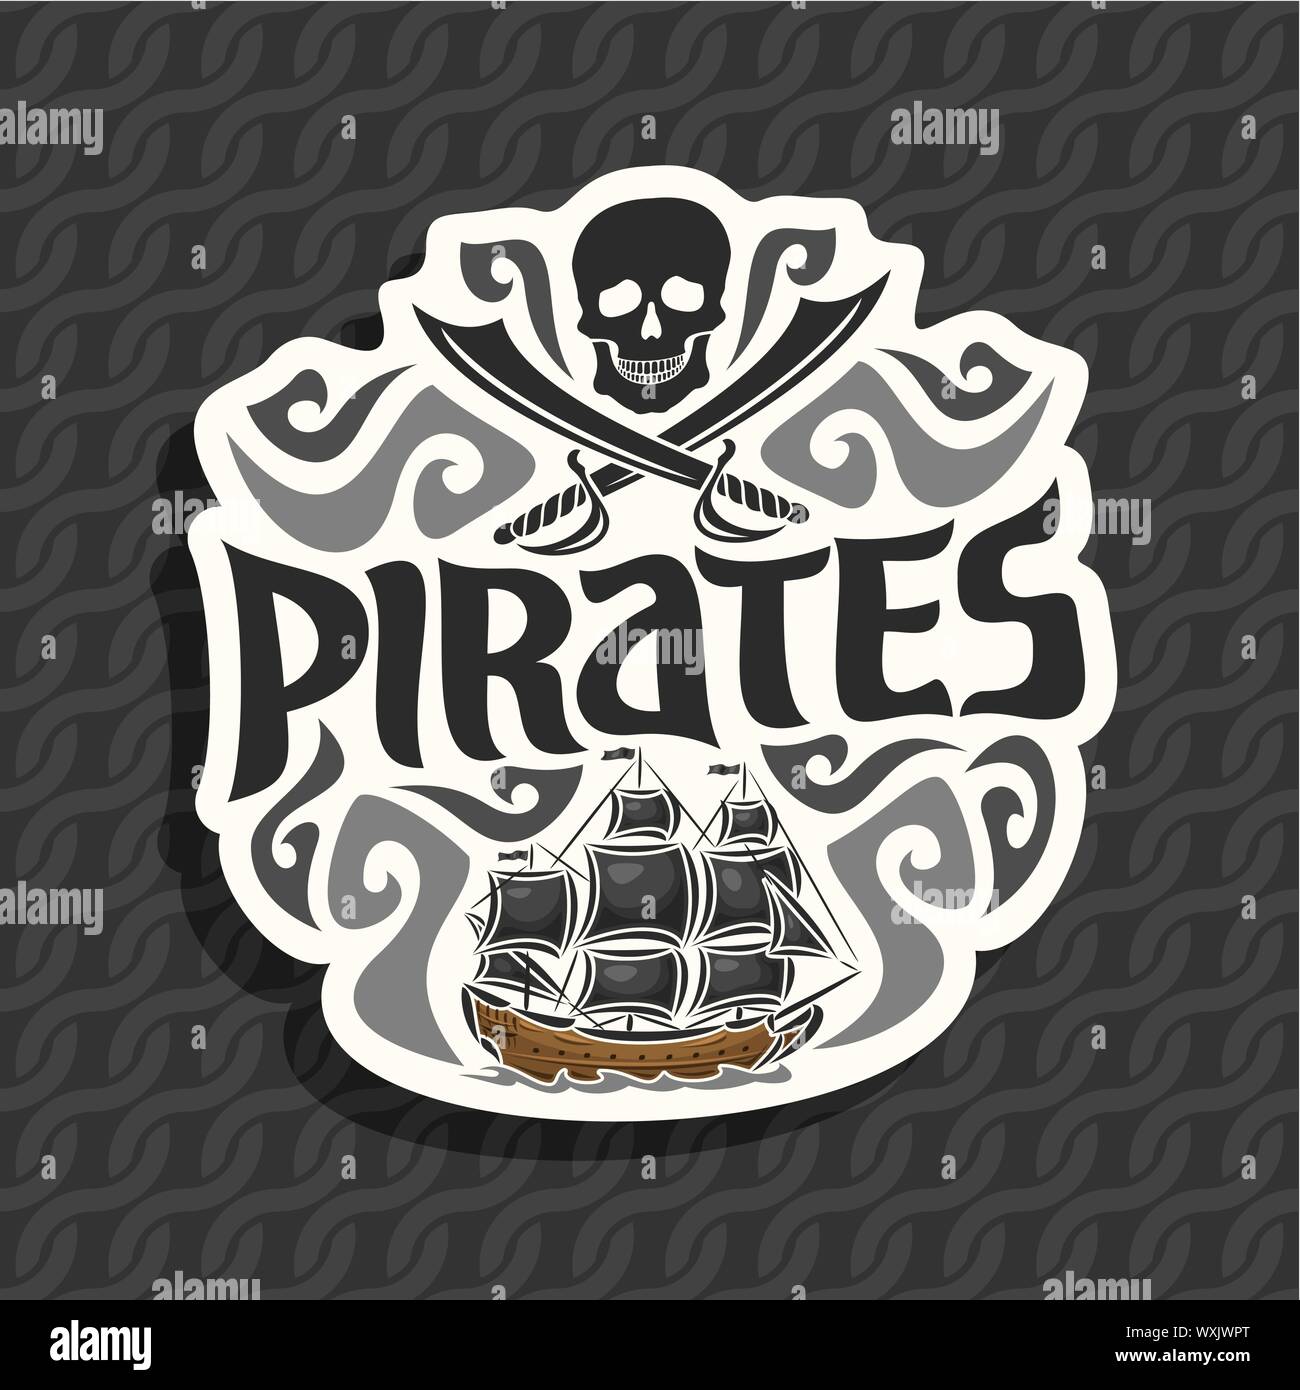 Vector logo for Pirates: black skull and crossed sabers and old sails ship with jolly roger flag on ropes seamless pattern. Stock Vector